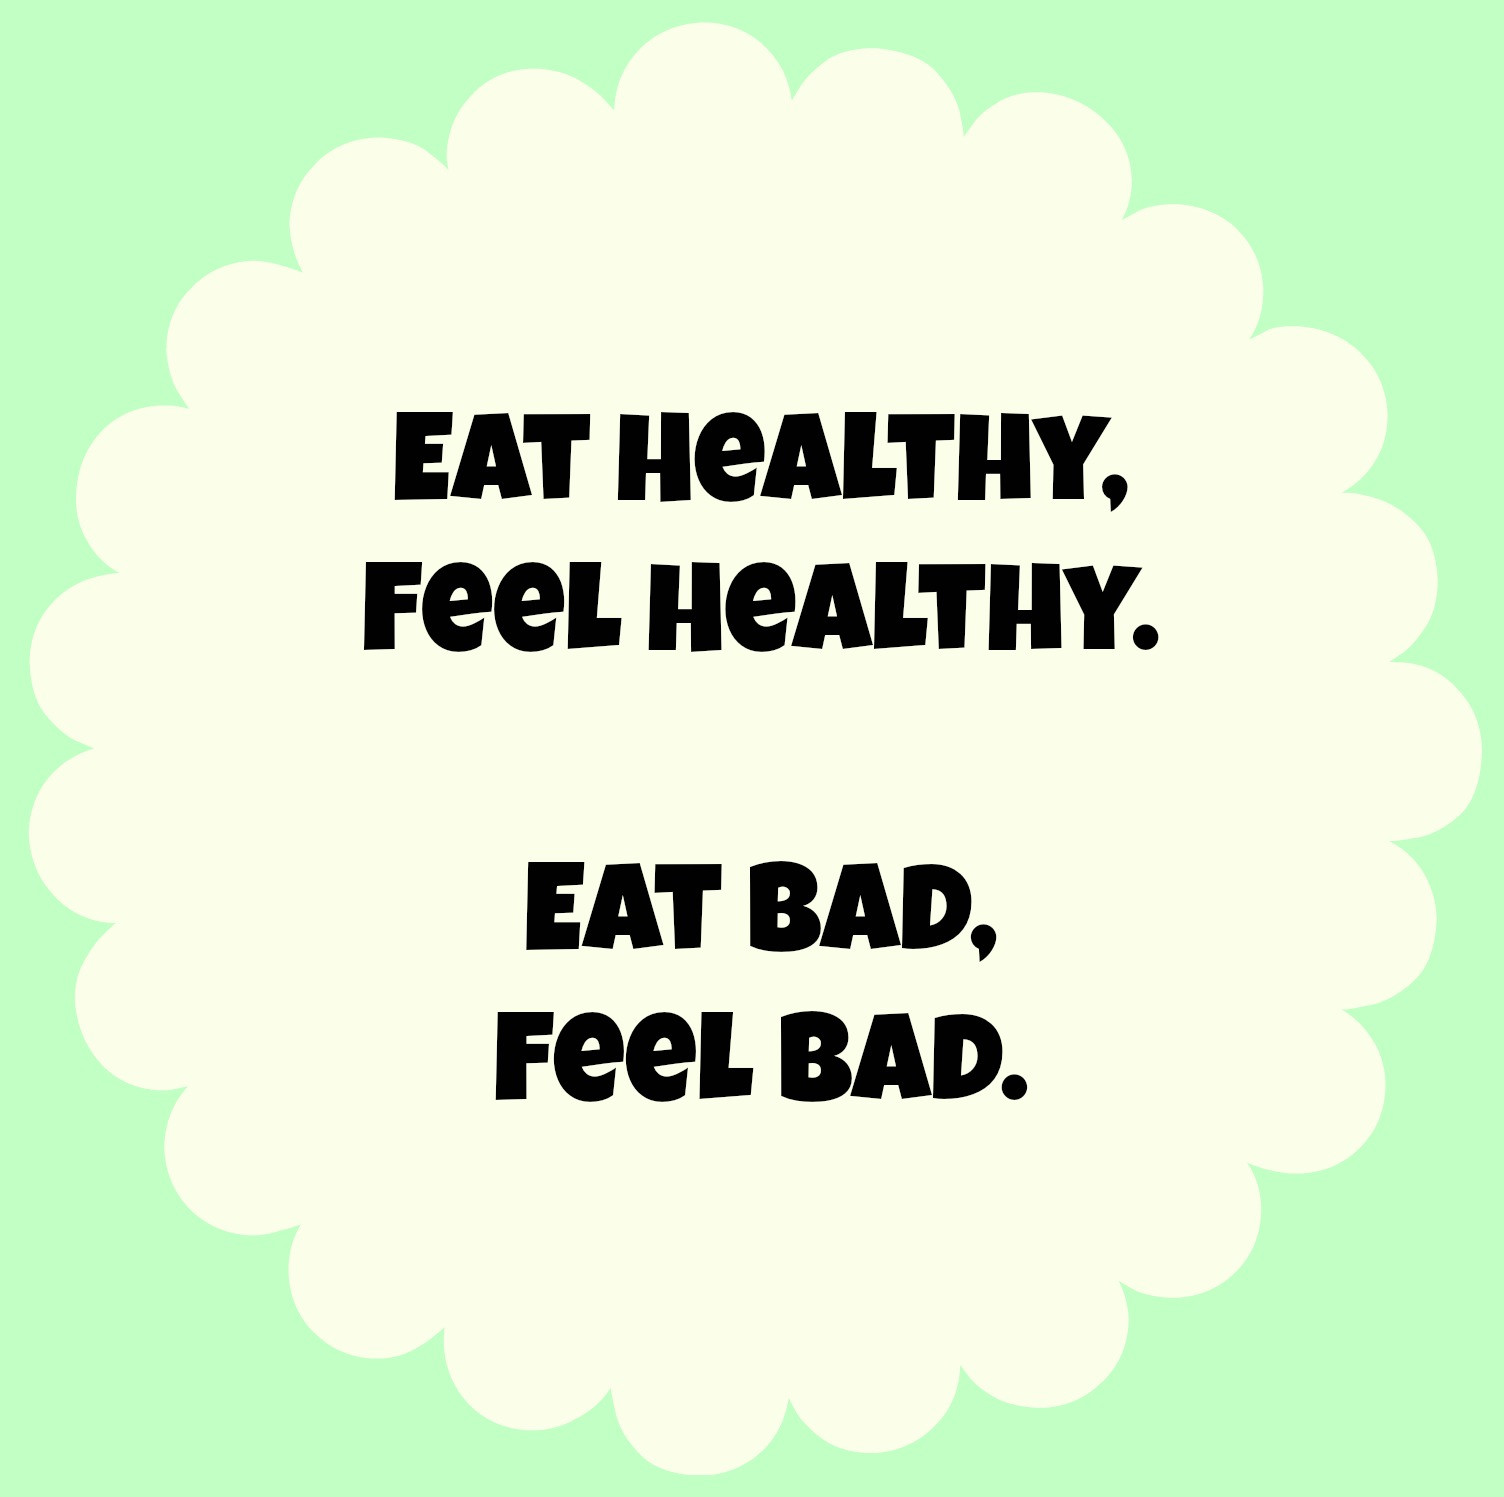 Healthy Eating Quotes Funny
 Motivational Quotes About Healthy Eating QuotesGram